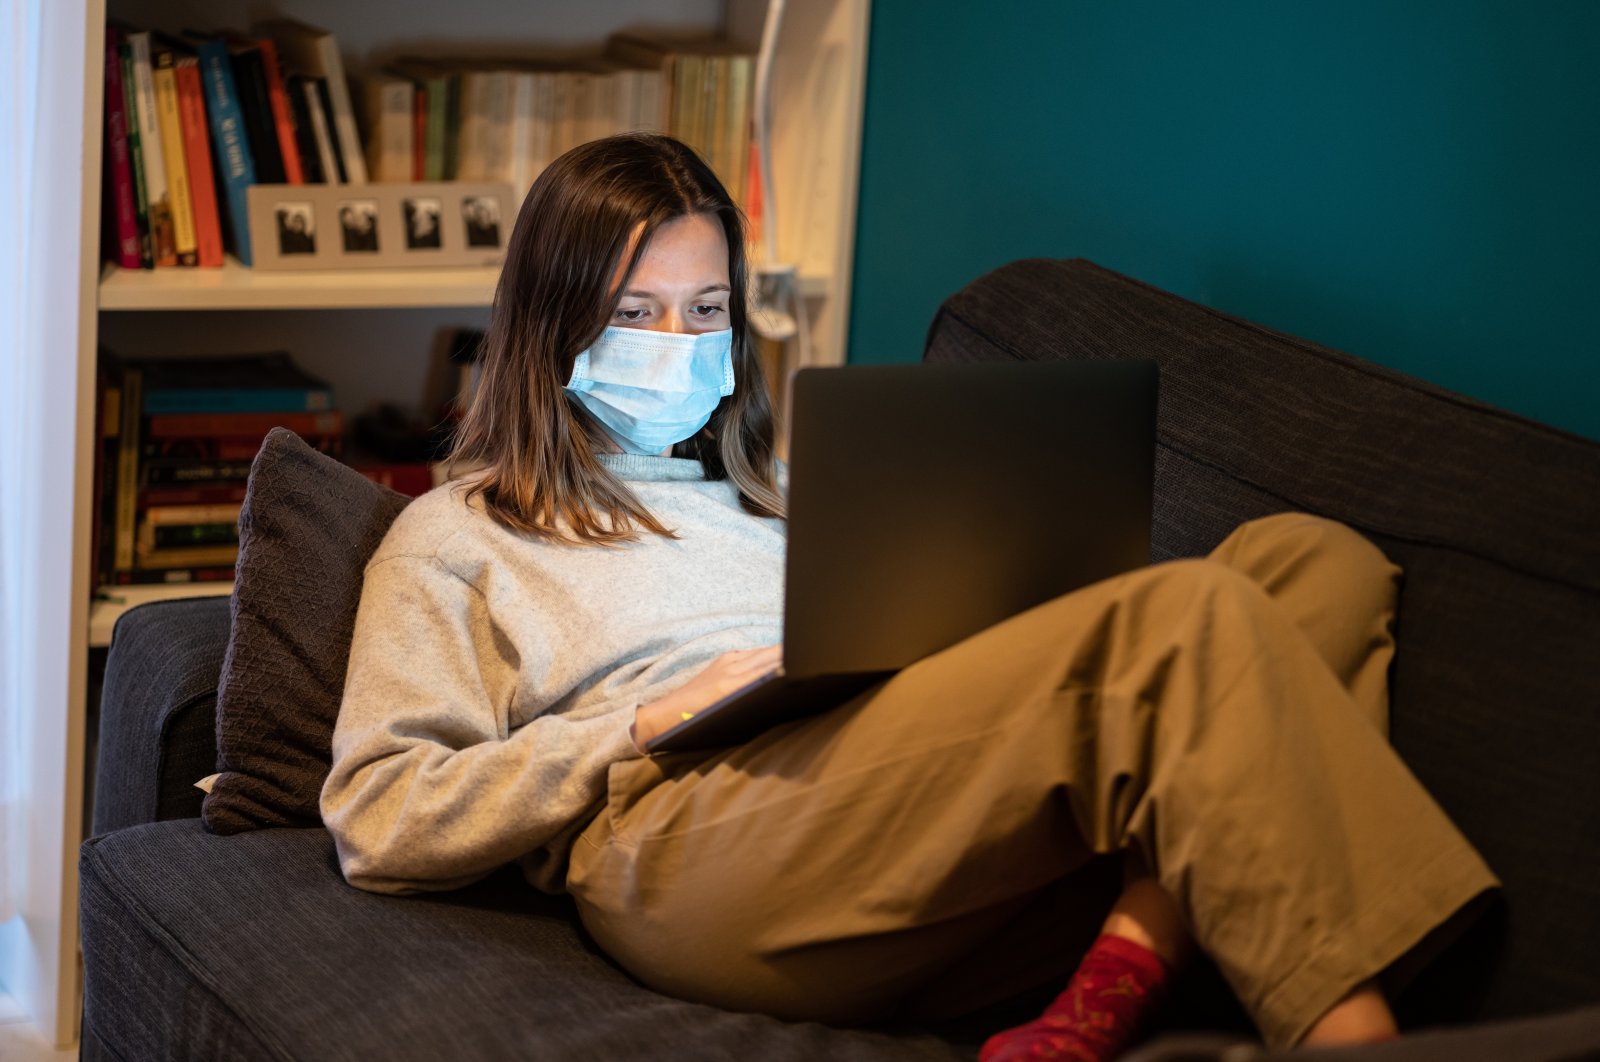 A stock photo shows a woman working from home during the COVID-19 quarantine. (Photo by Shutterstock)